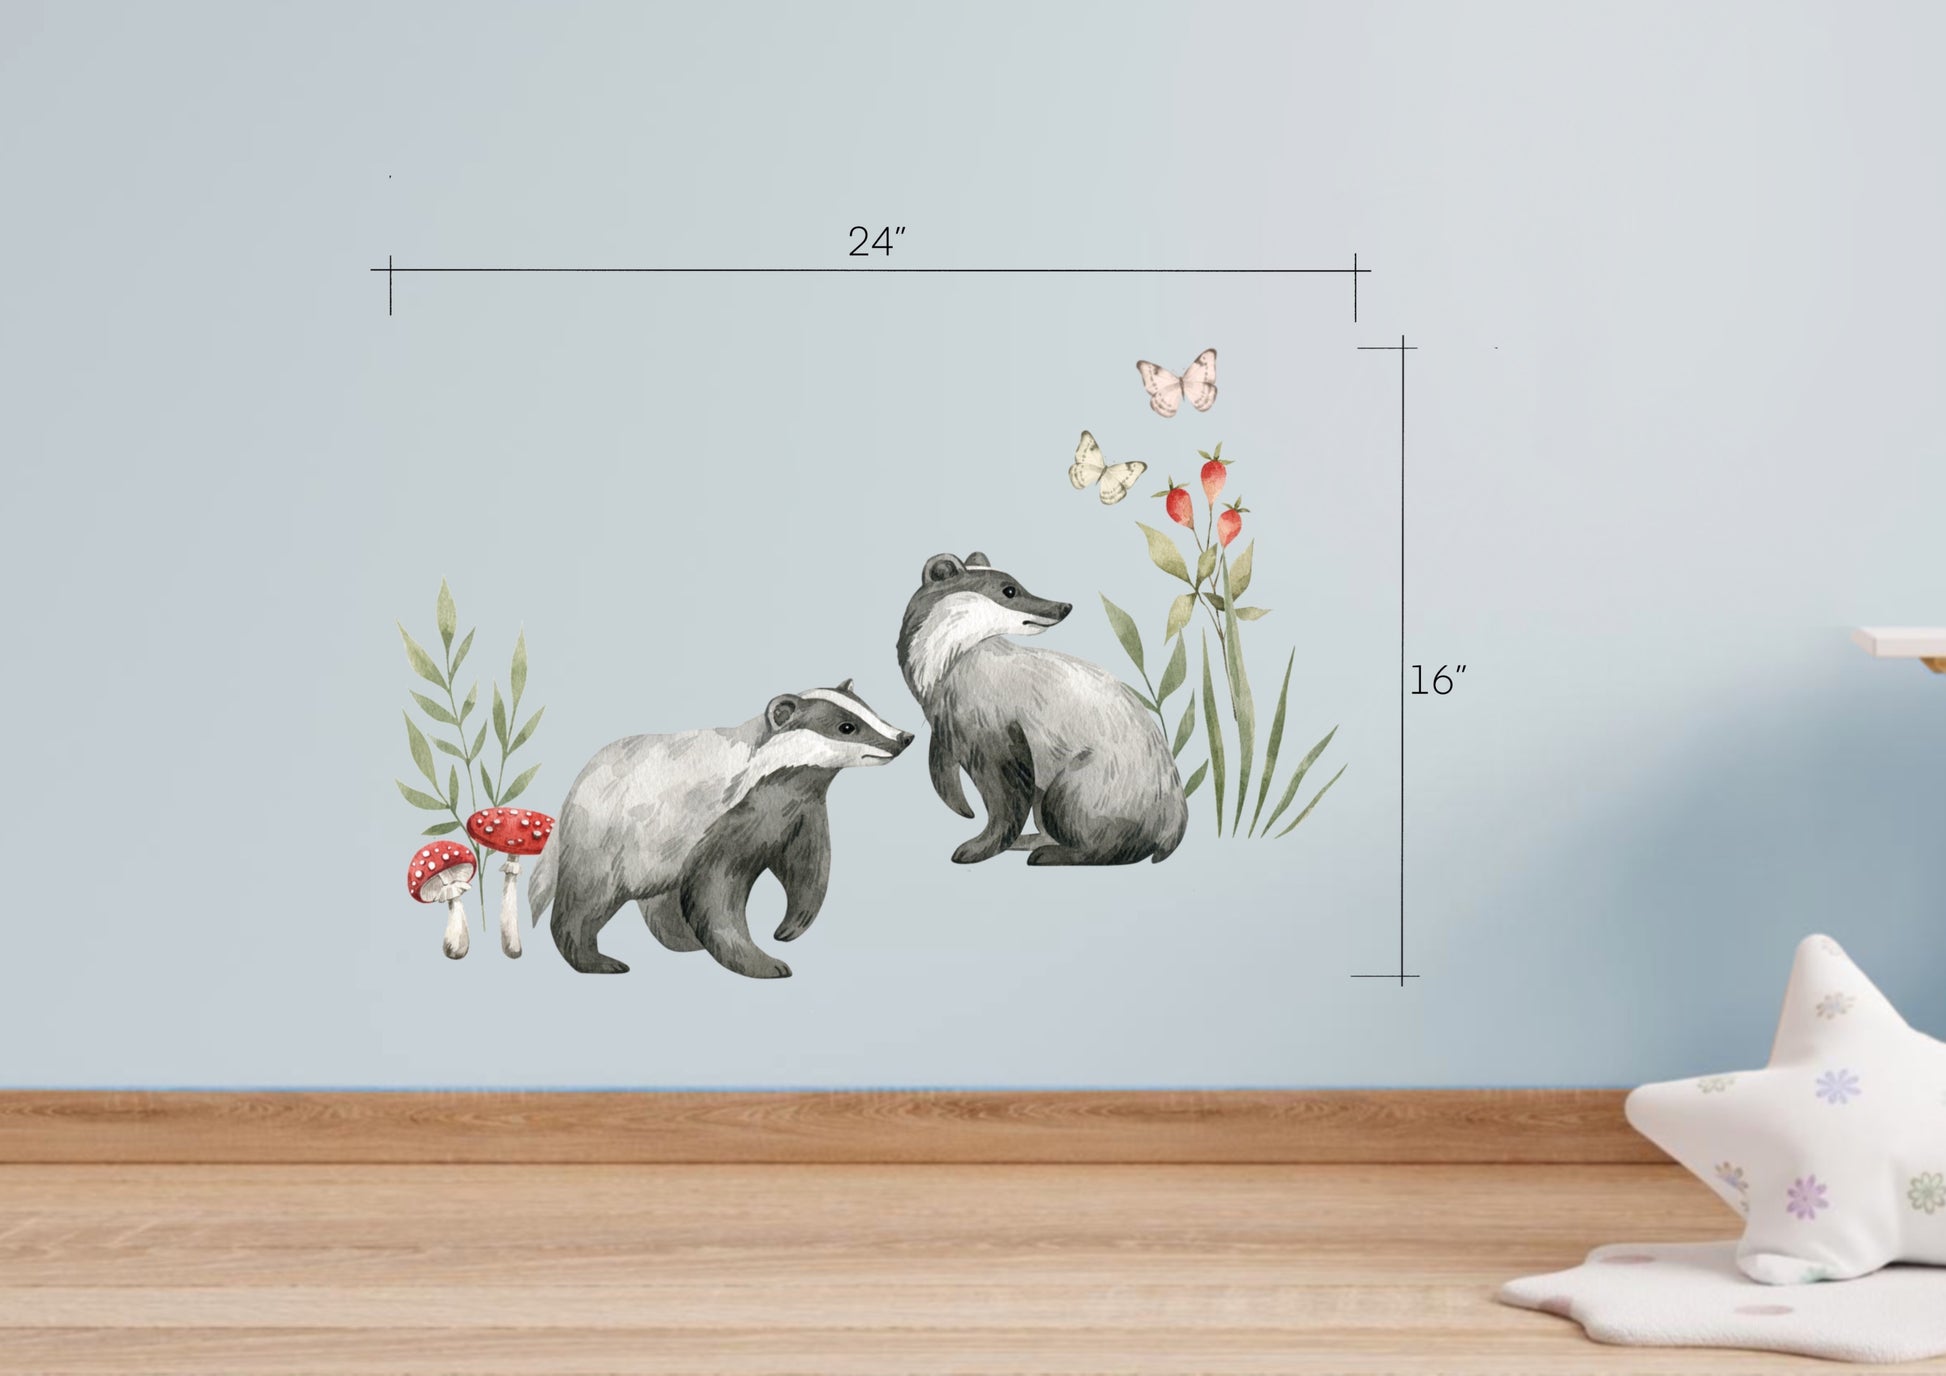 simple kids decoration, wall art. affordable wall art.